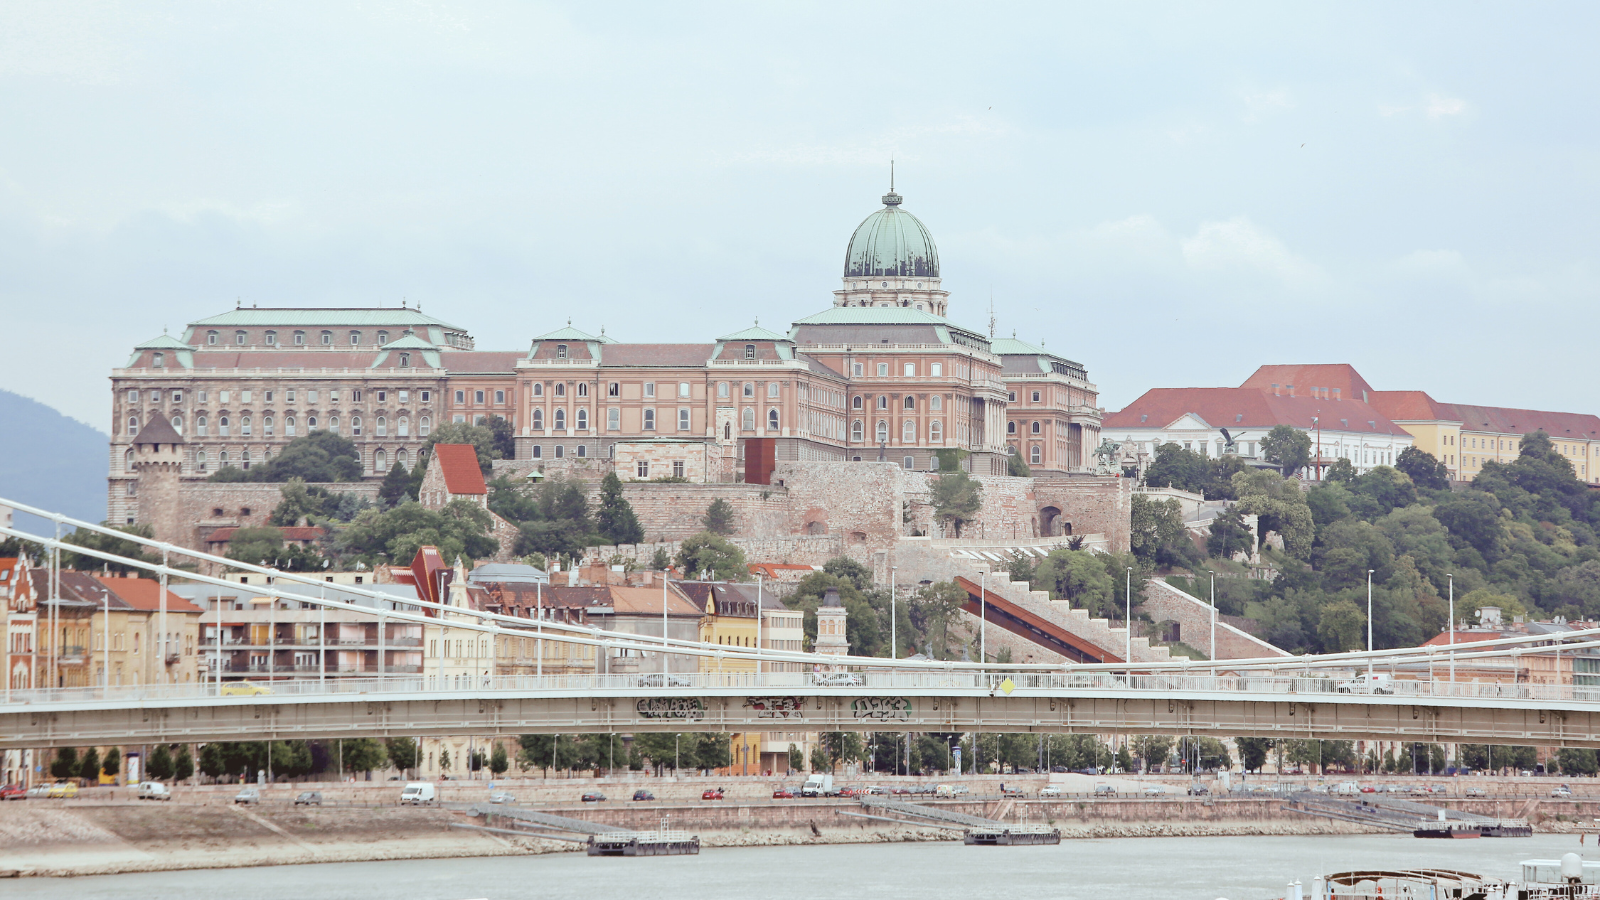 Buda Castle Tour - bus rental in Budapest for 1 day